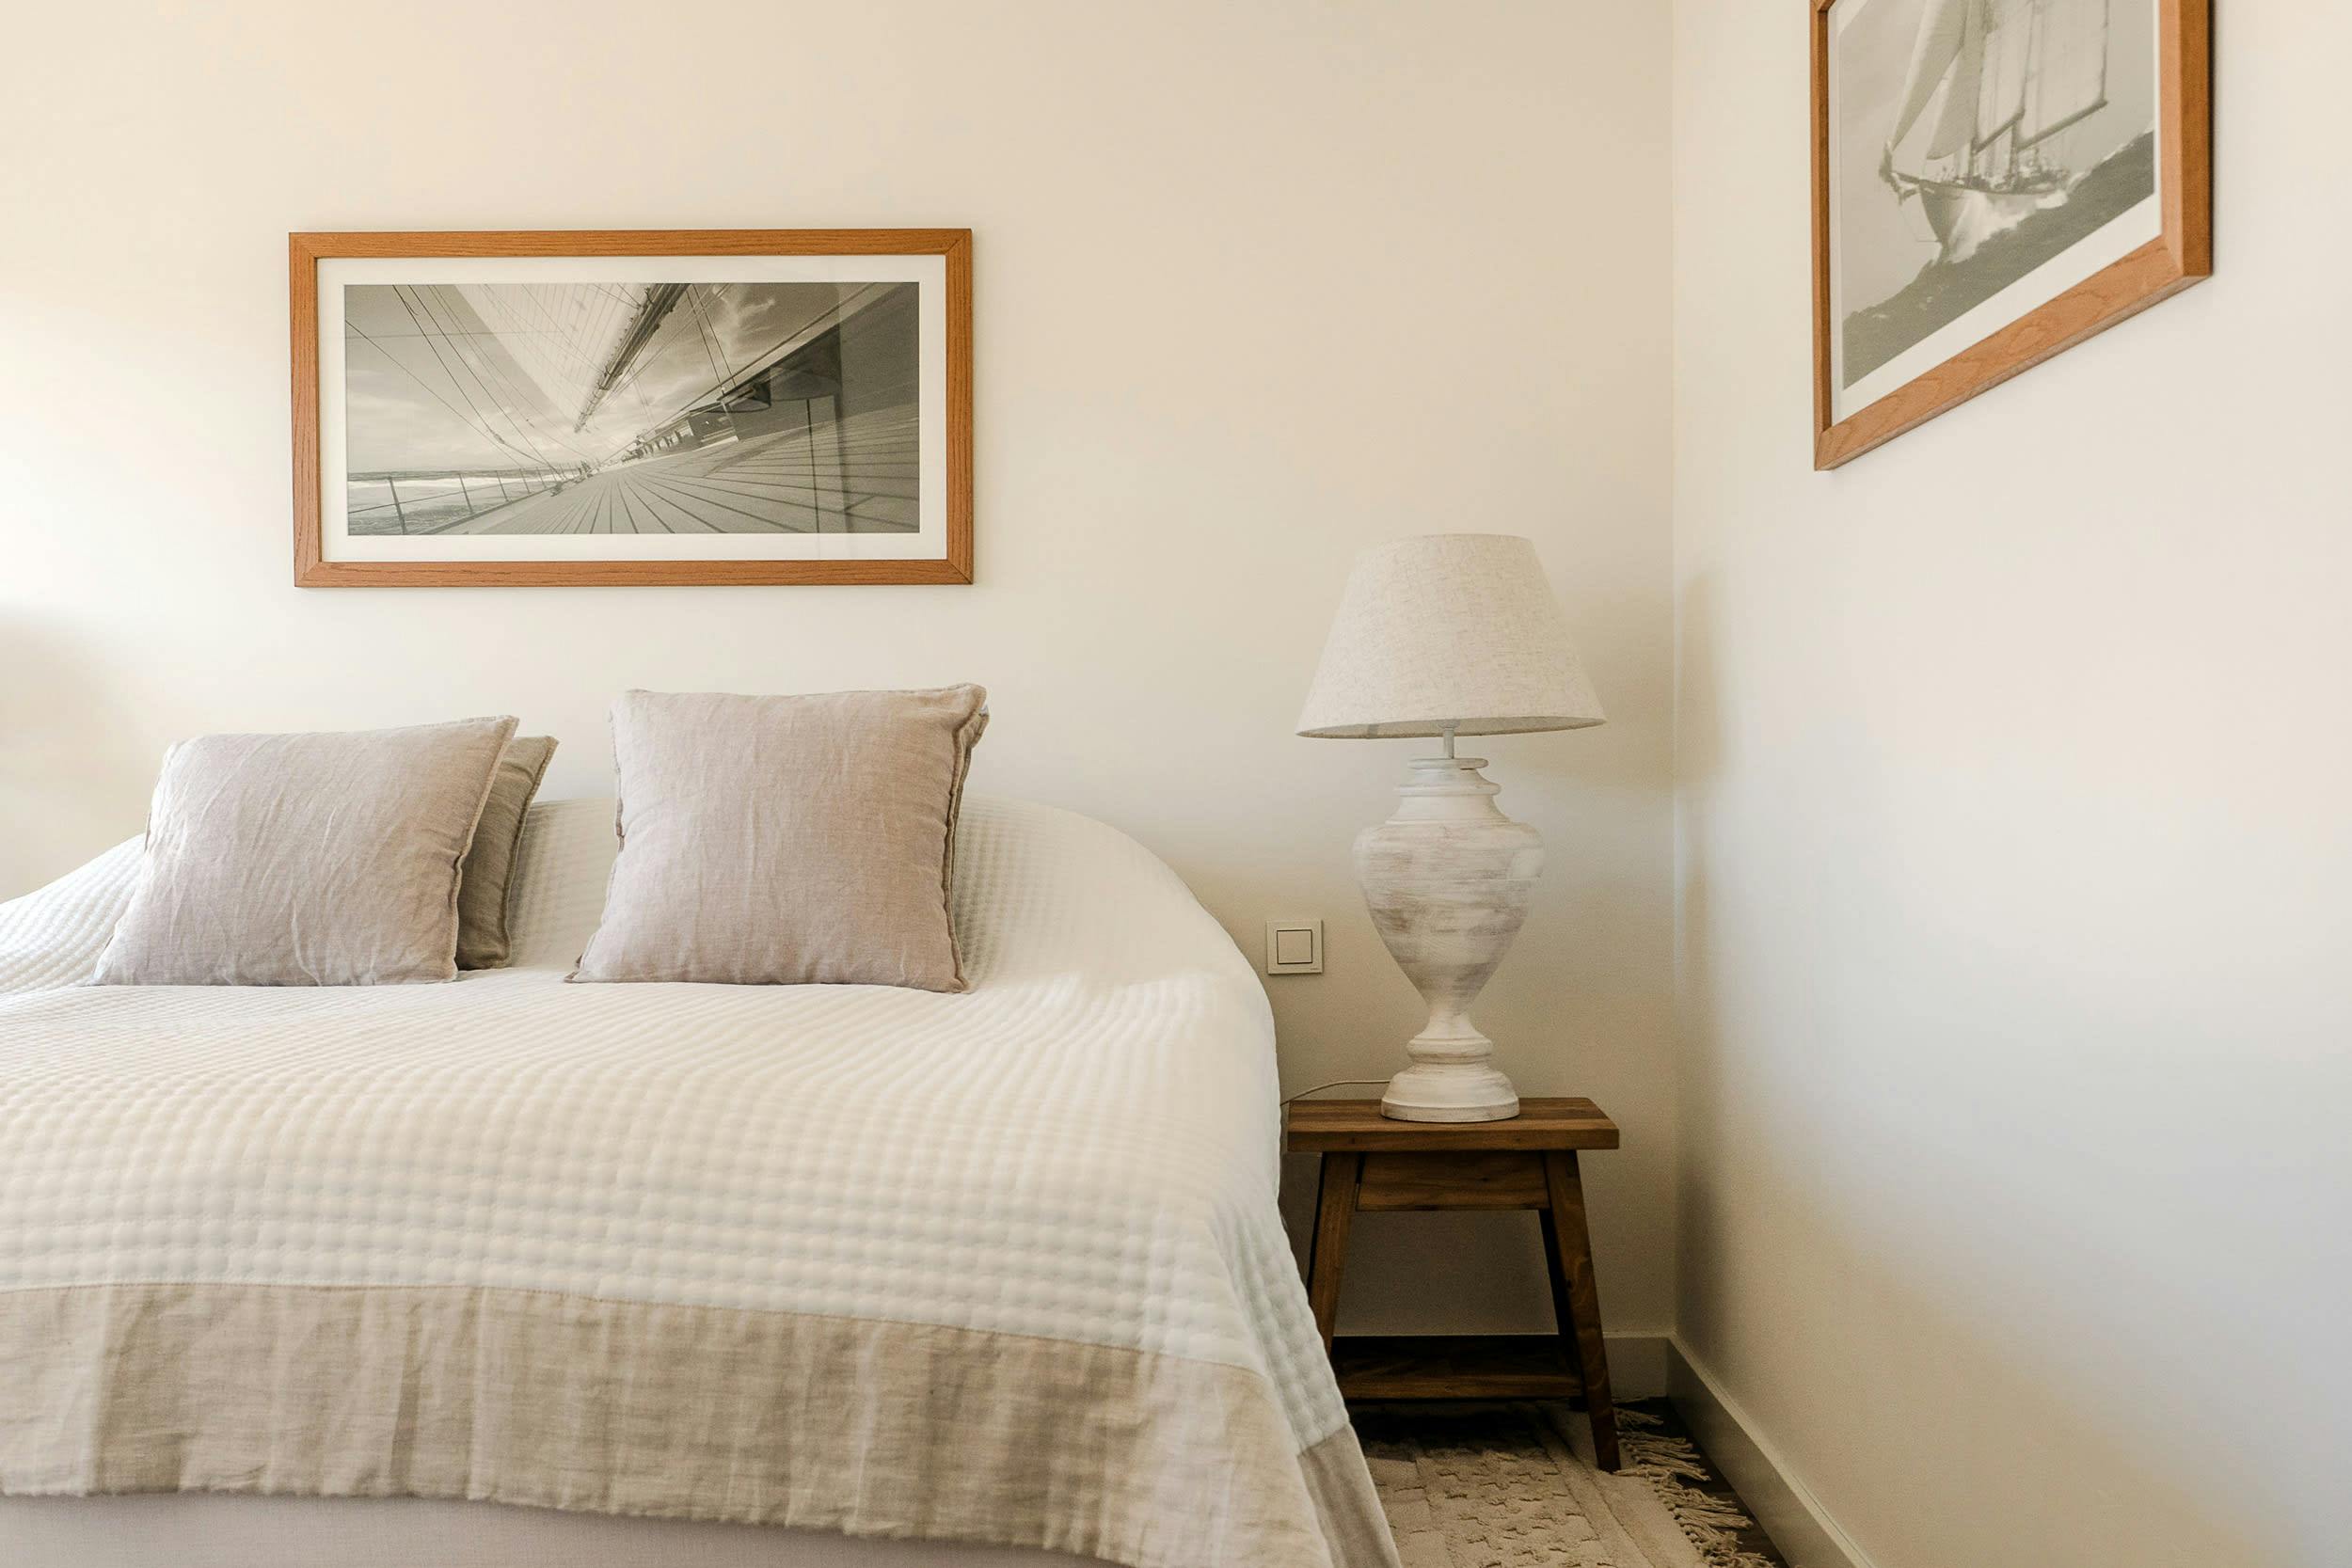 The image features a neatly made bed with a white comforter and pillows, placed next to a lamp and a picture on the wall.